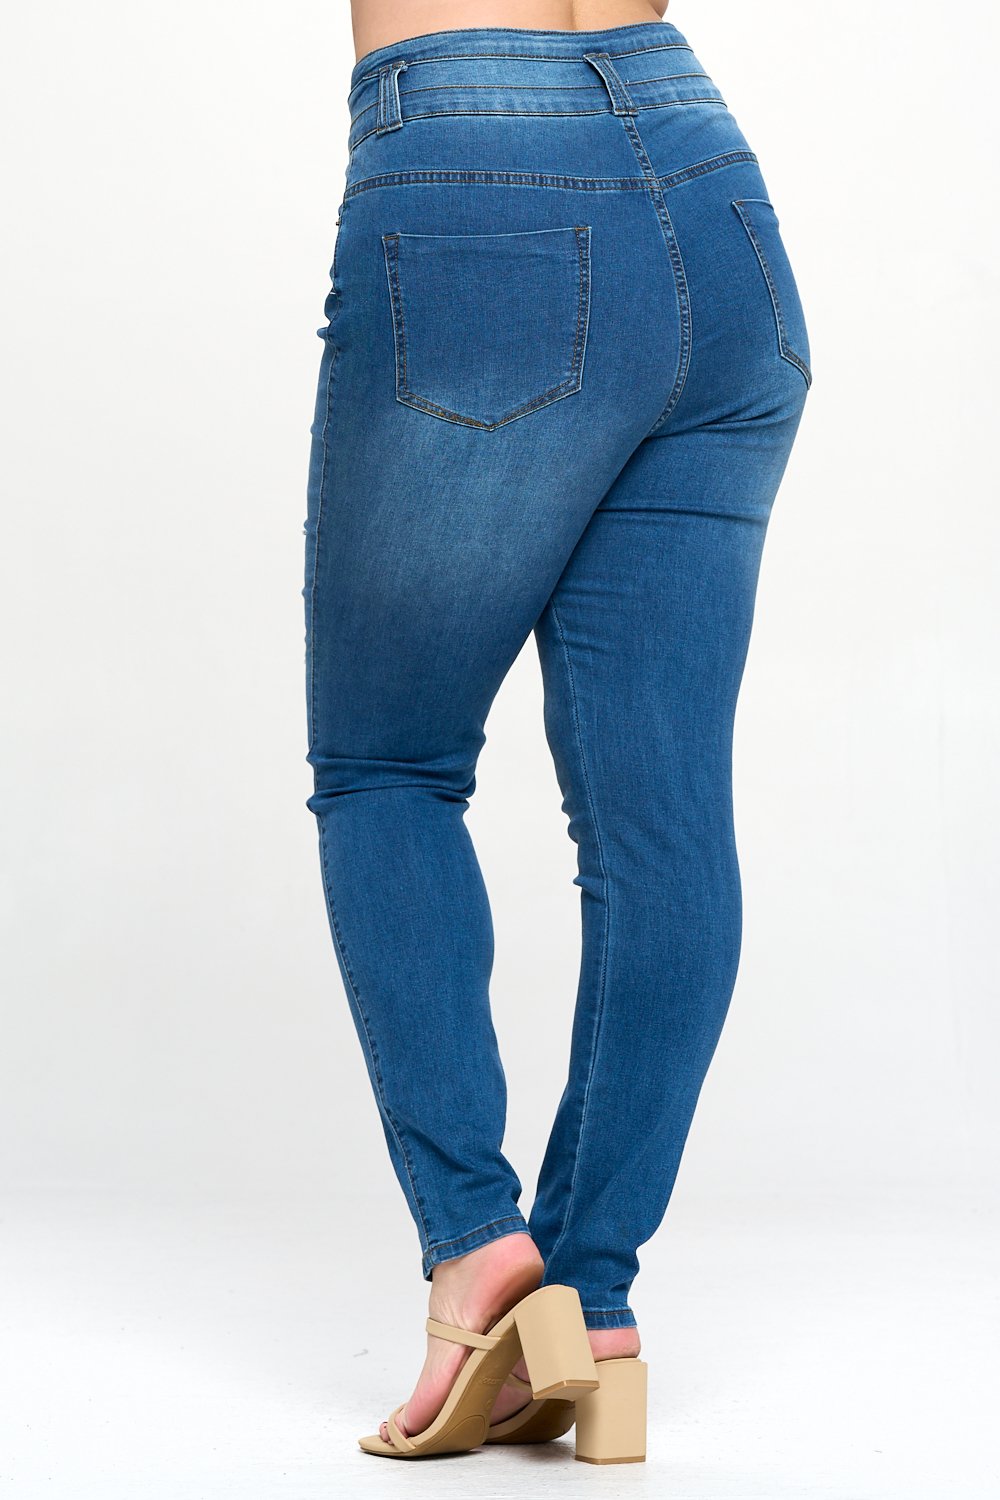 Stacked Waist Slimming High Waist Skinny Jeans Light Blue Plus Size